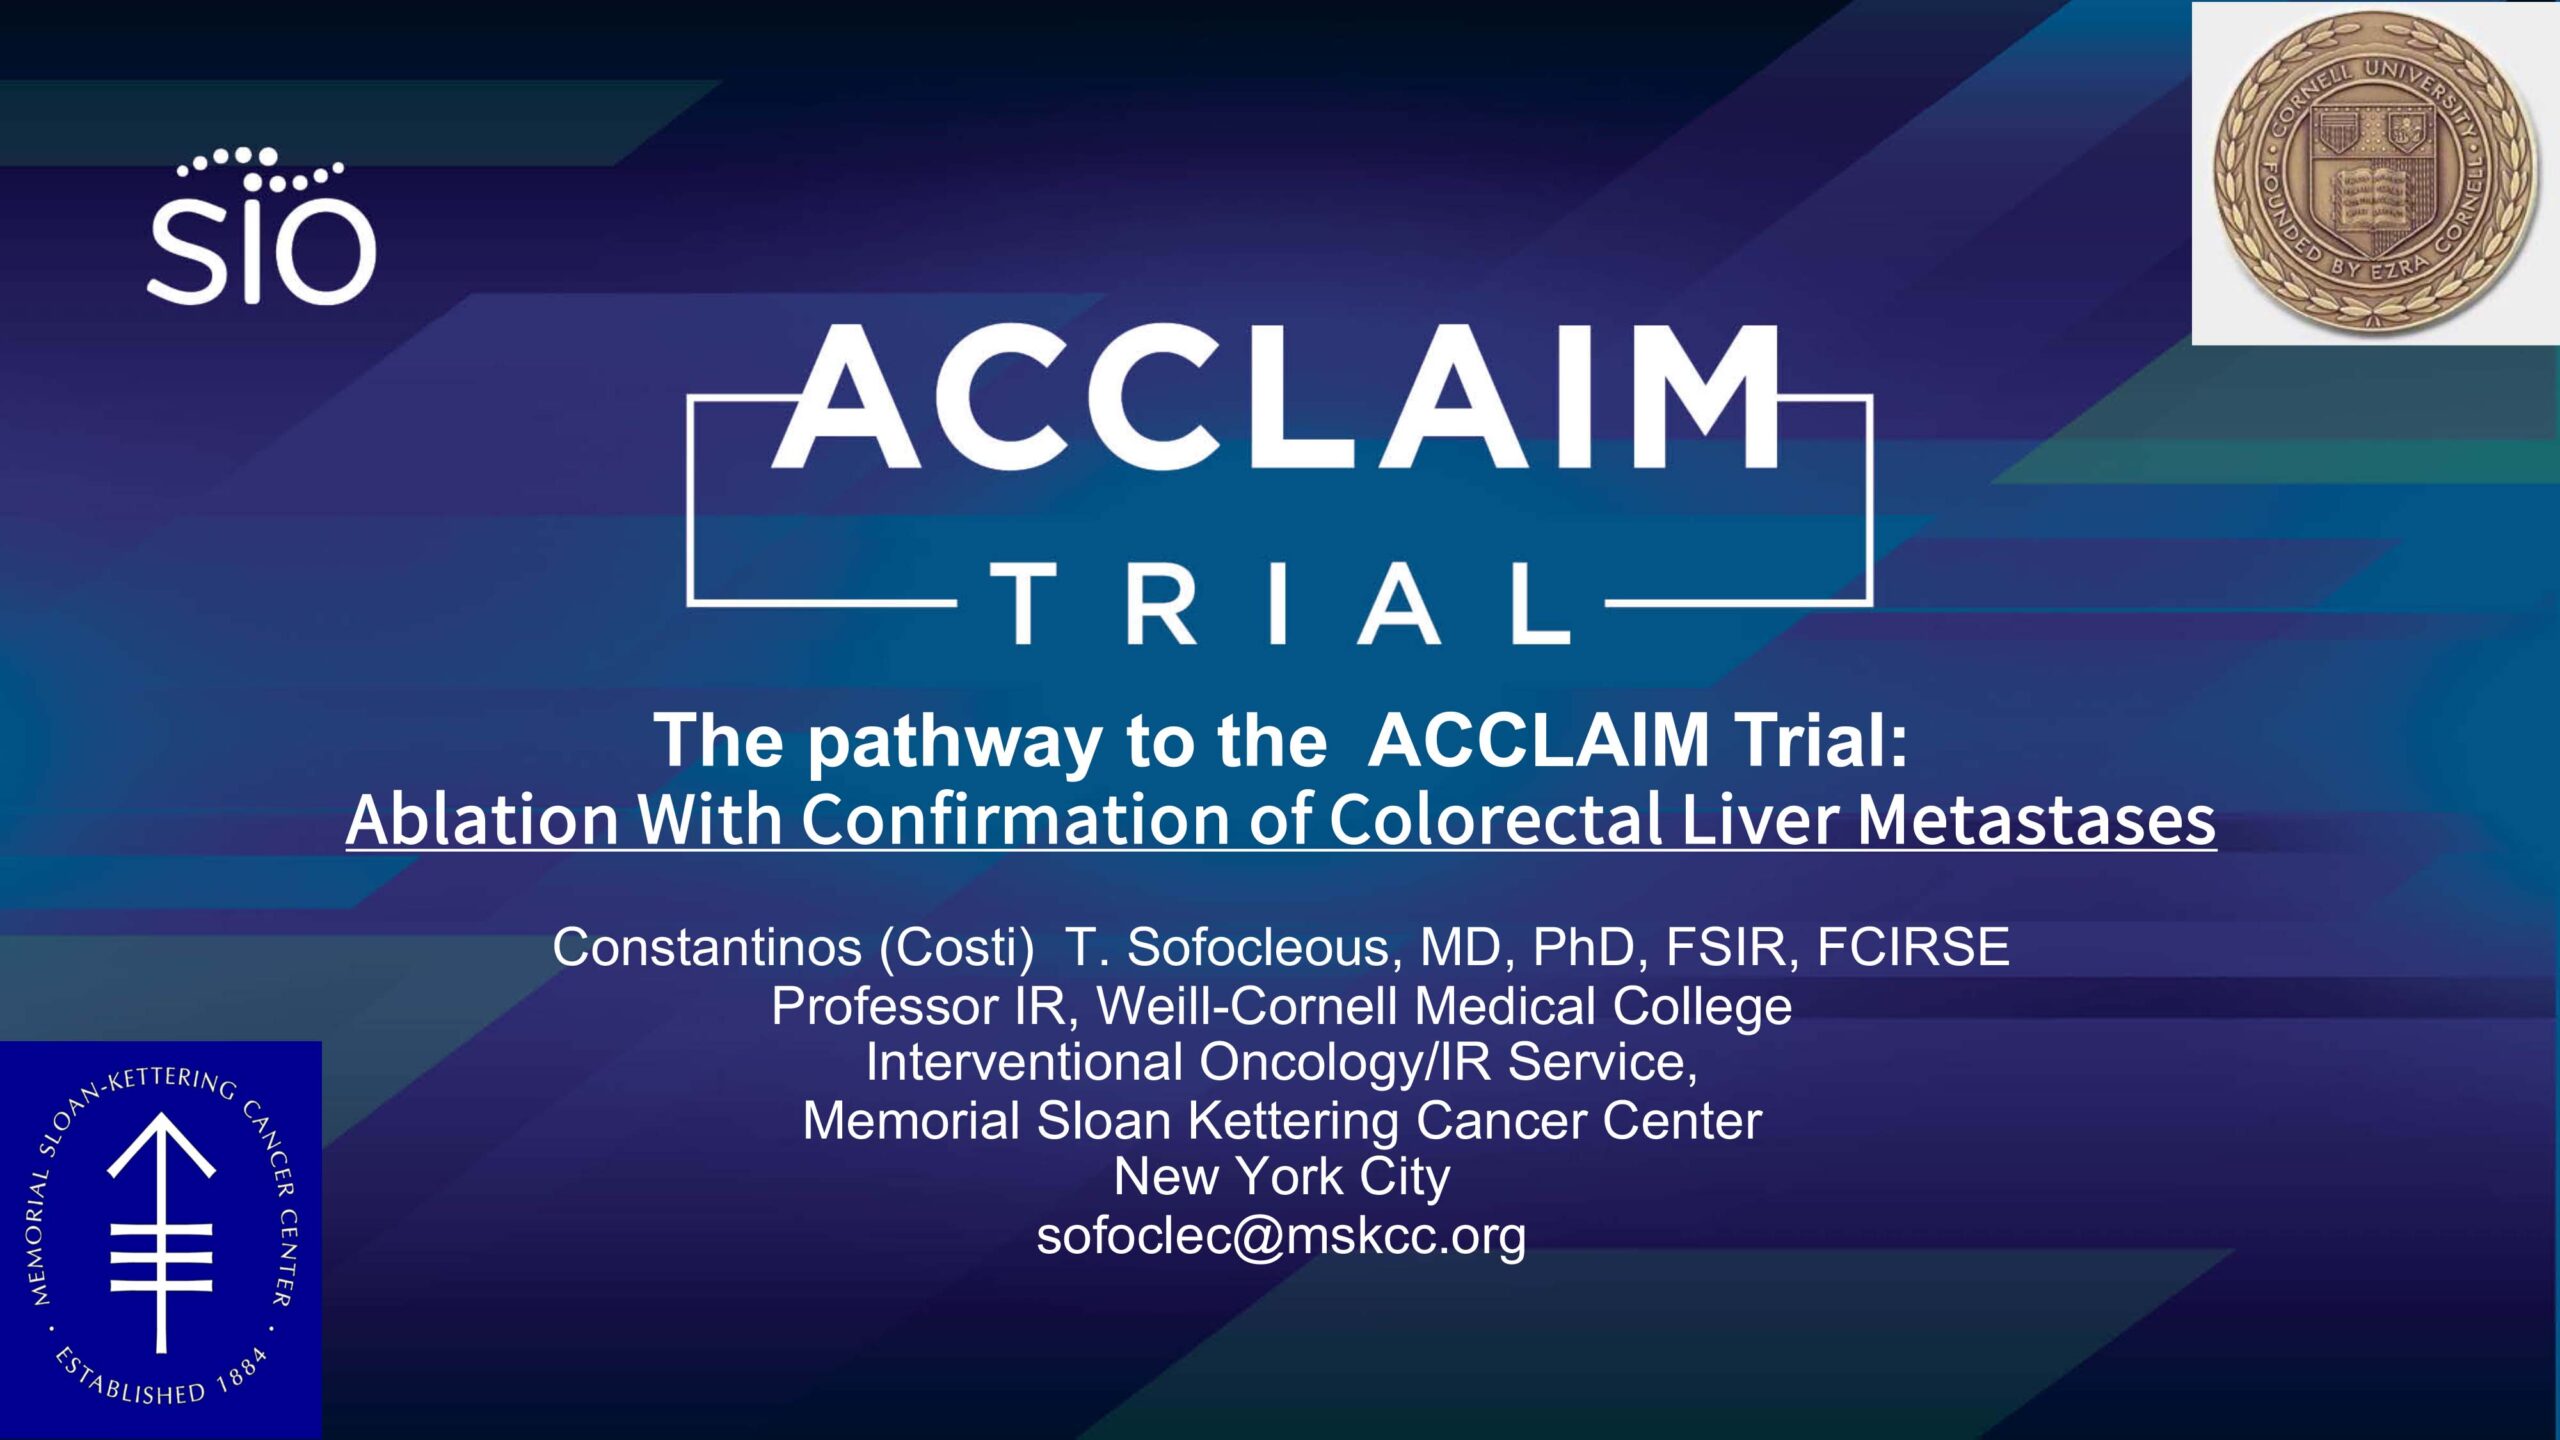 The ACCLAIM trial